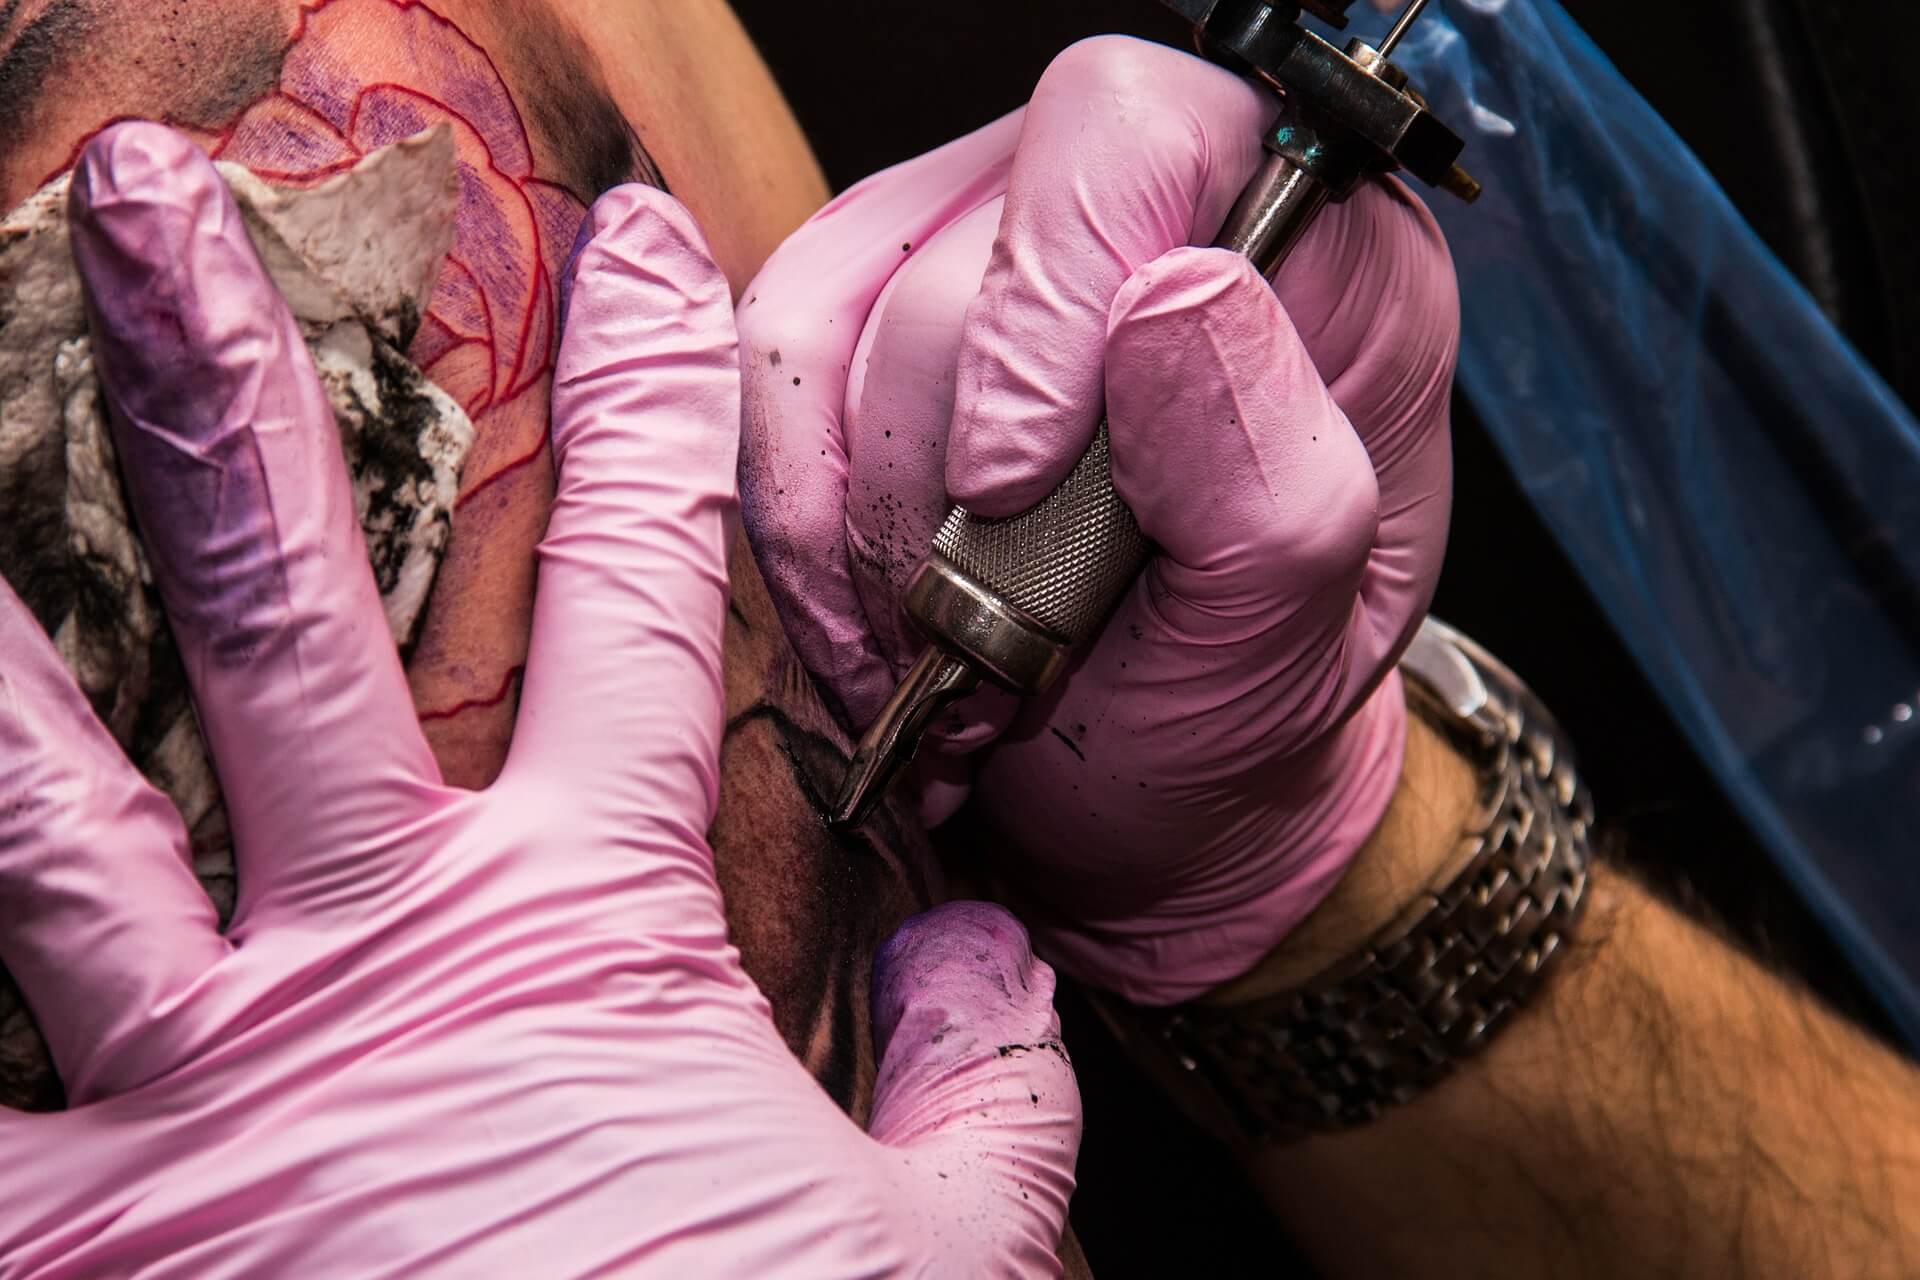 Tattoo Discrimination: Is It a Growing HR Issue?